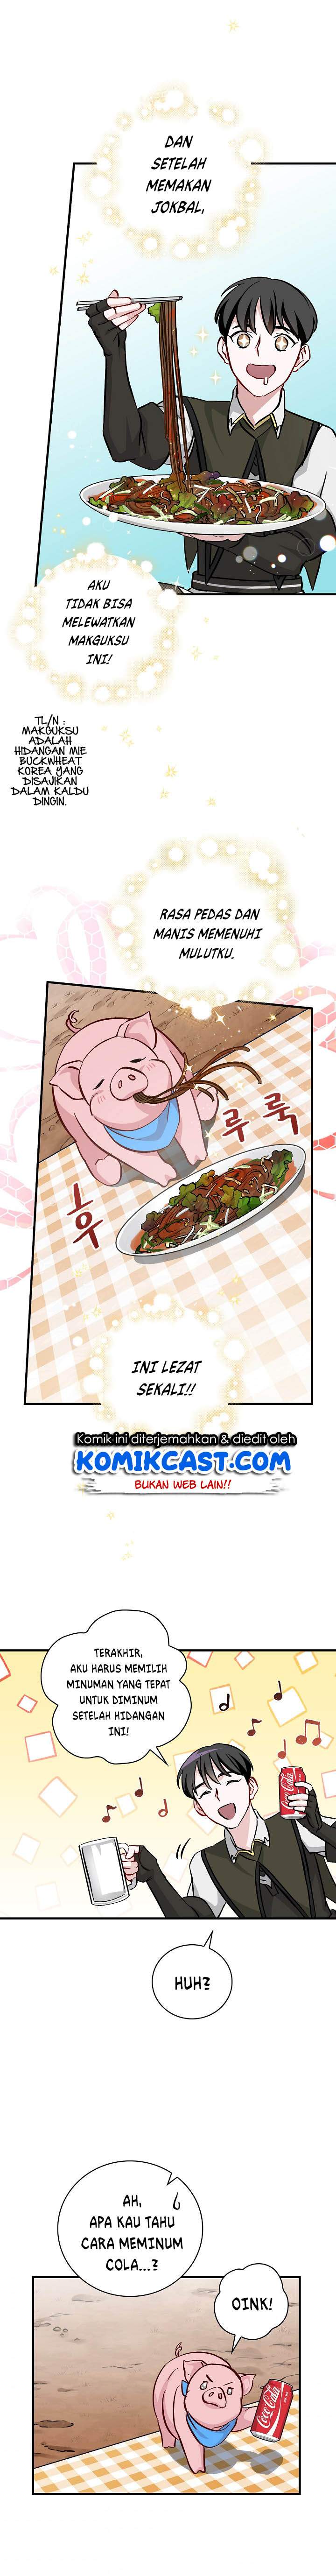 Leveling Up, By Only Eating! (Gourmet Gaming) Chapter 56 - 167